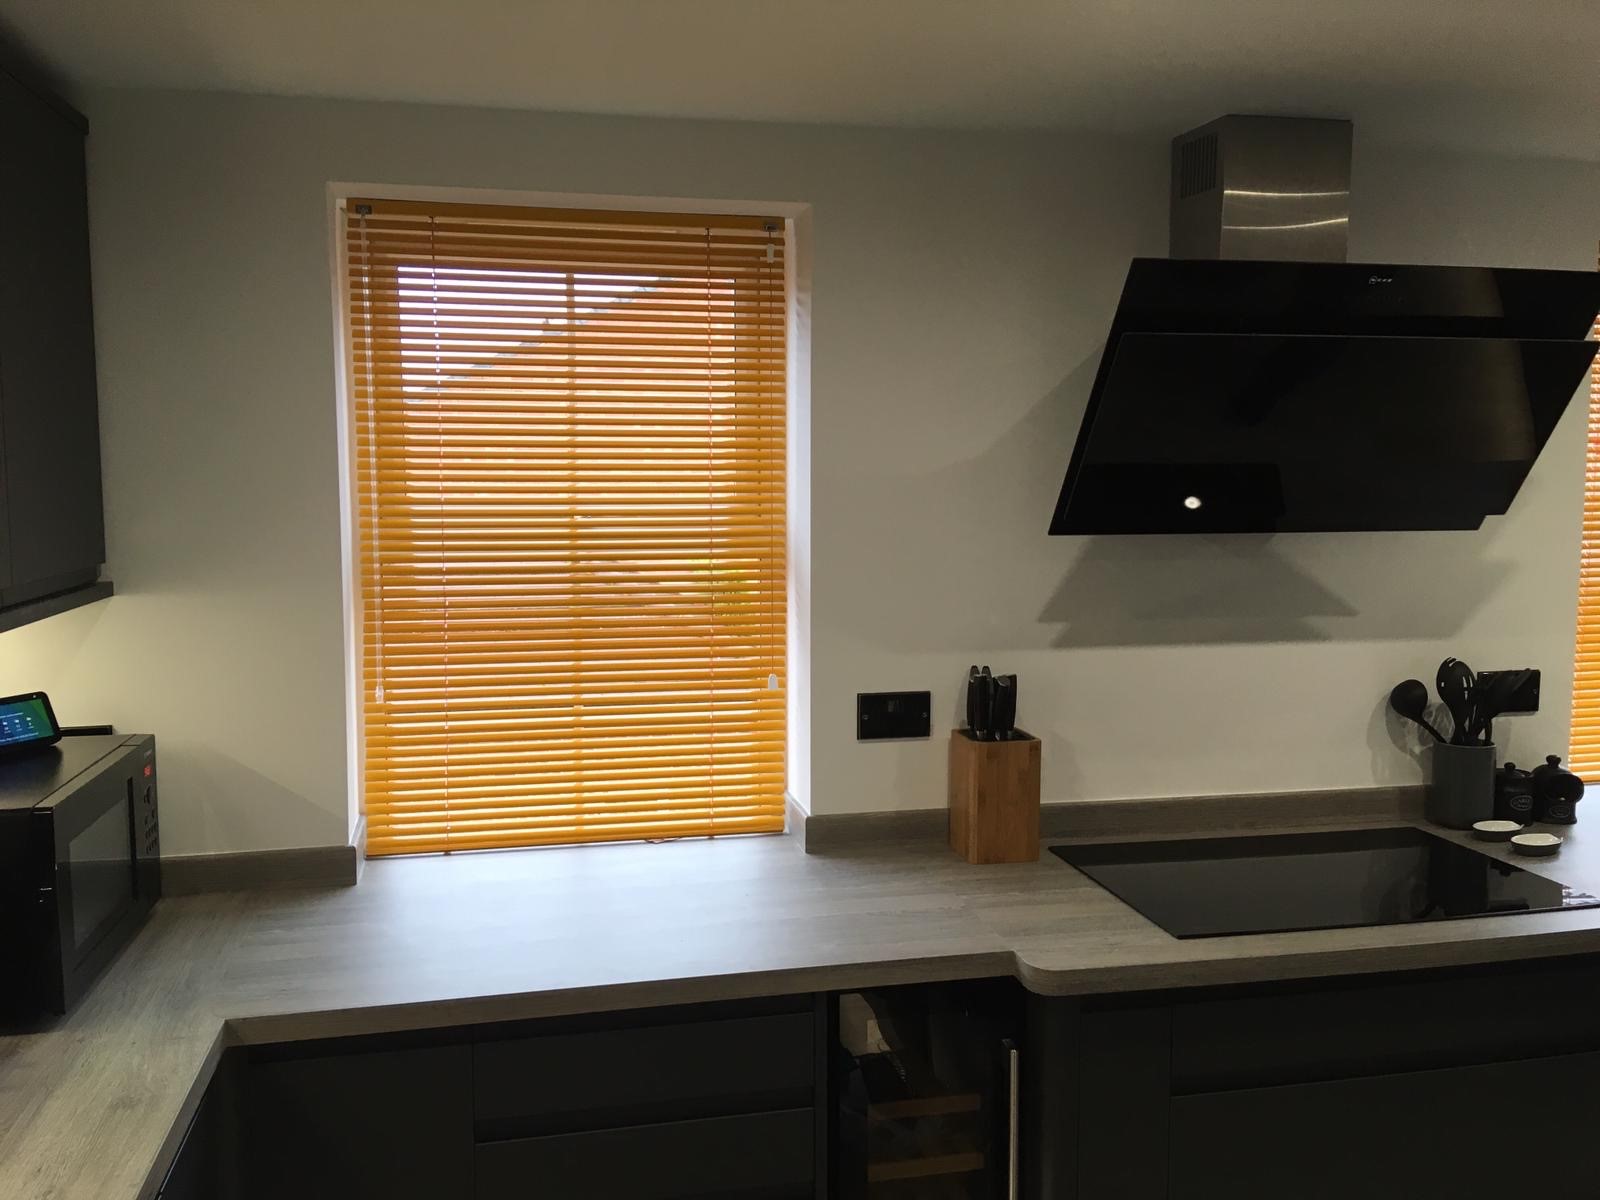 Aluminium Blinds For Kitchens Arnold